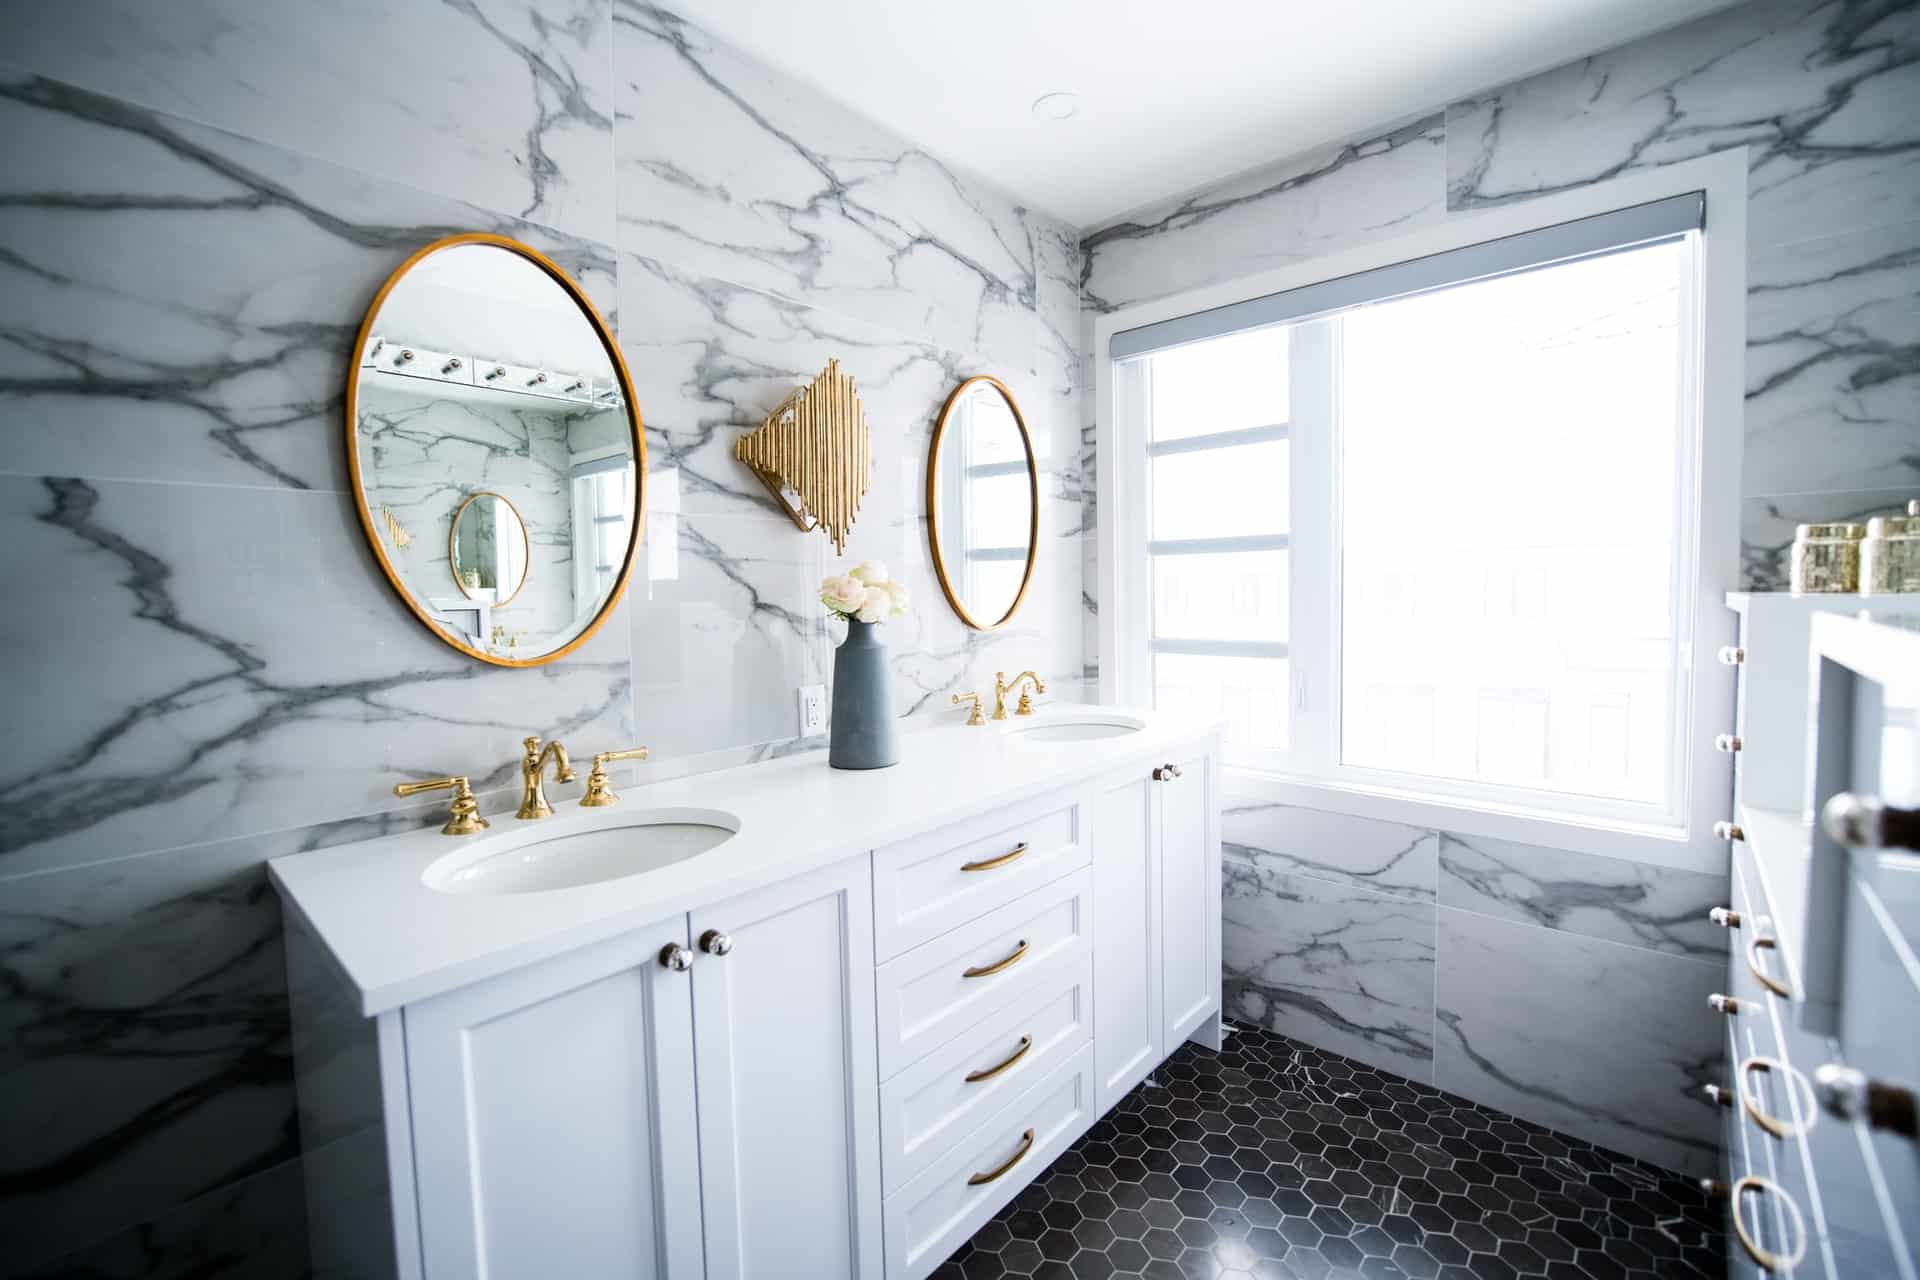 The Cost Of Bathroom Vanities A, Cost To Replace Vanity Top And Faucet